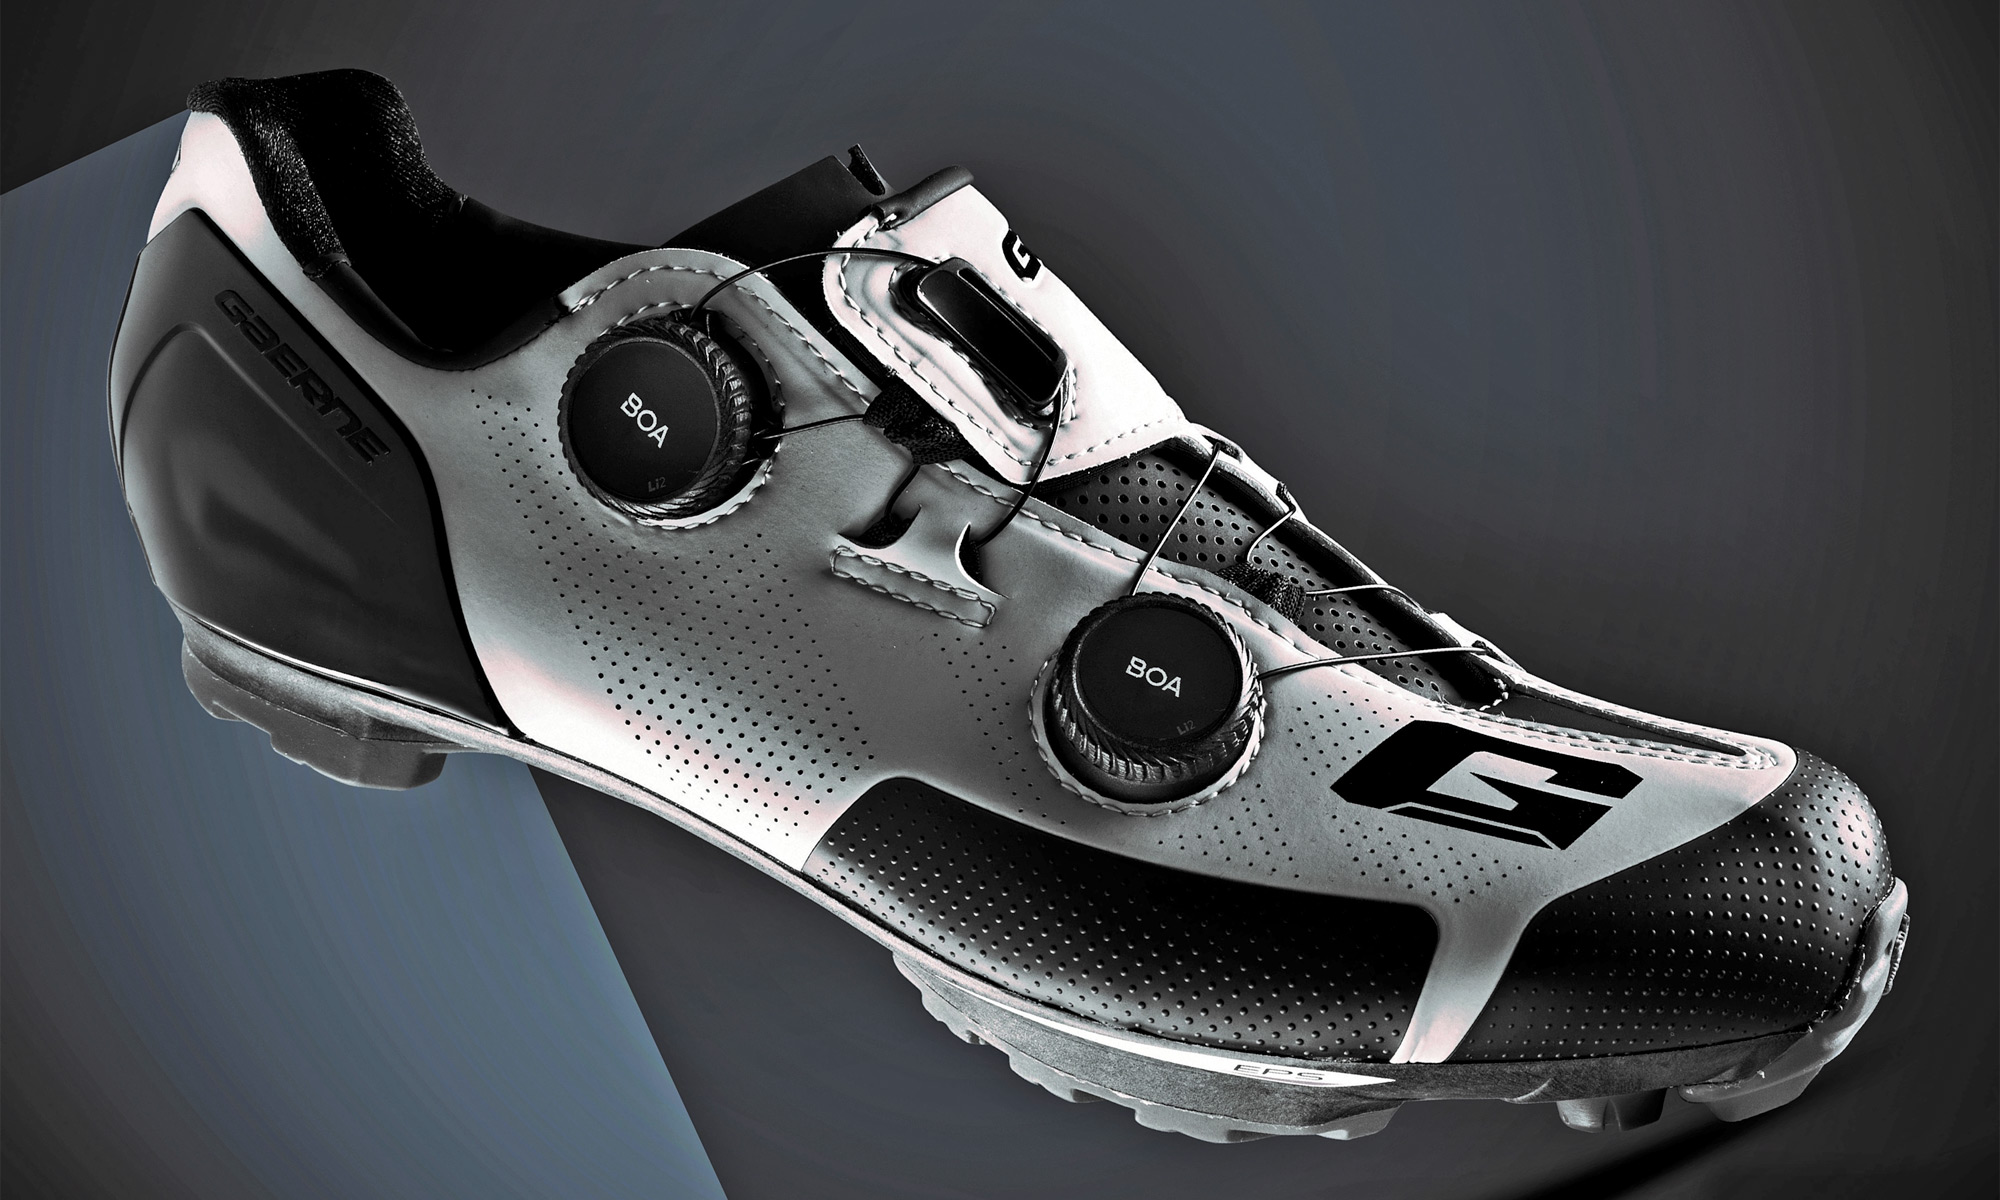 Gaerne G.SNX XC MTB shoes, top-tier race performance carbon cross-country mountain bike shoe, angled